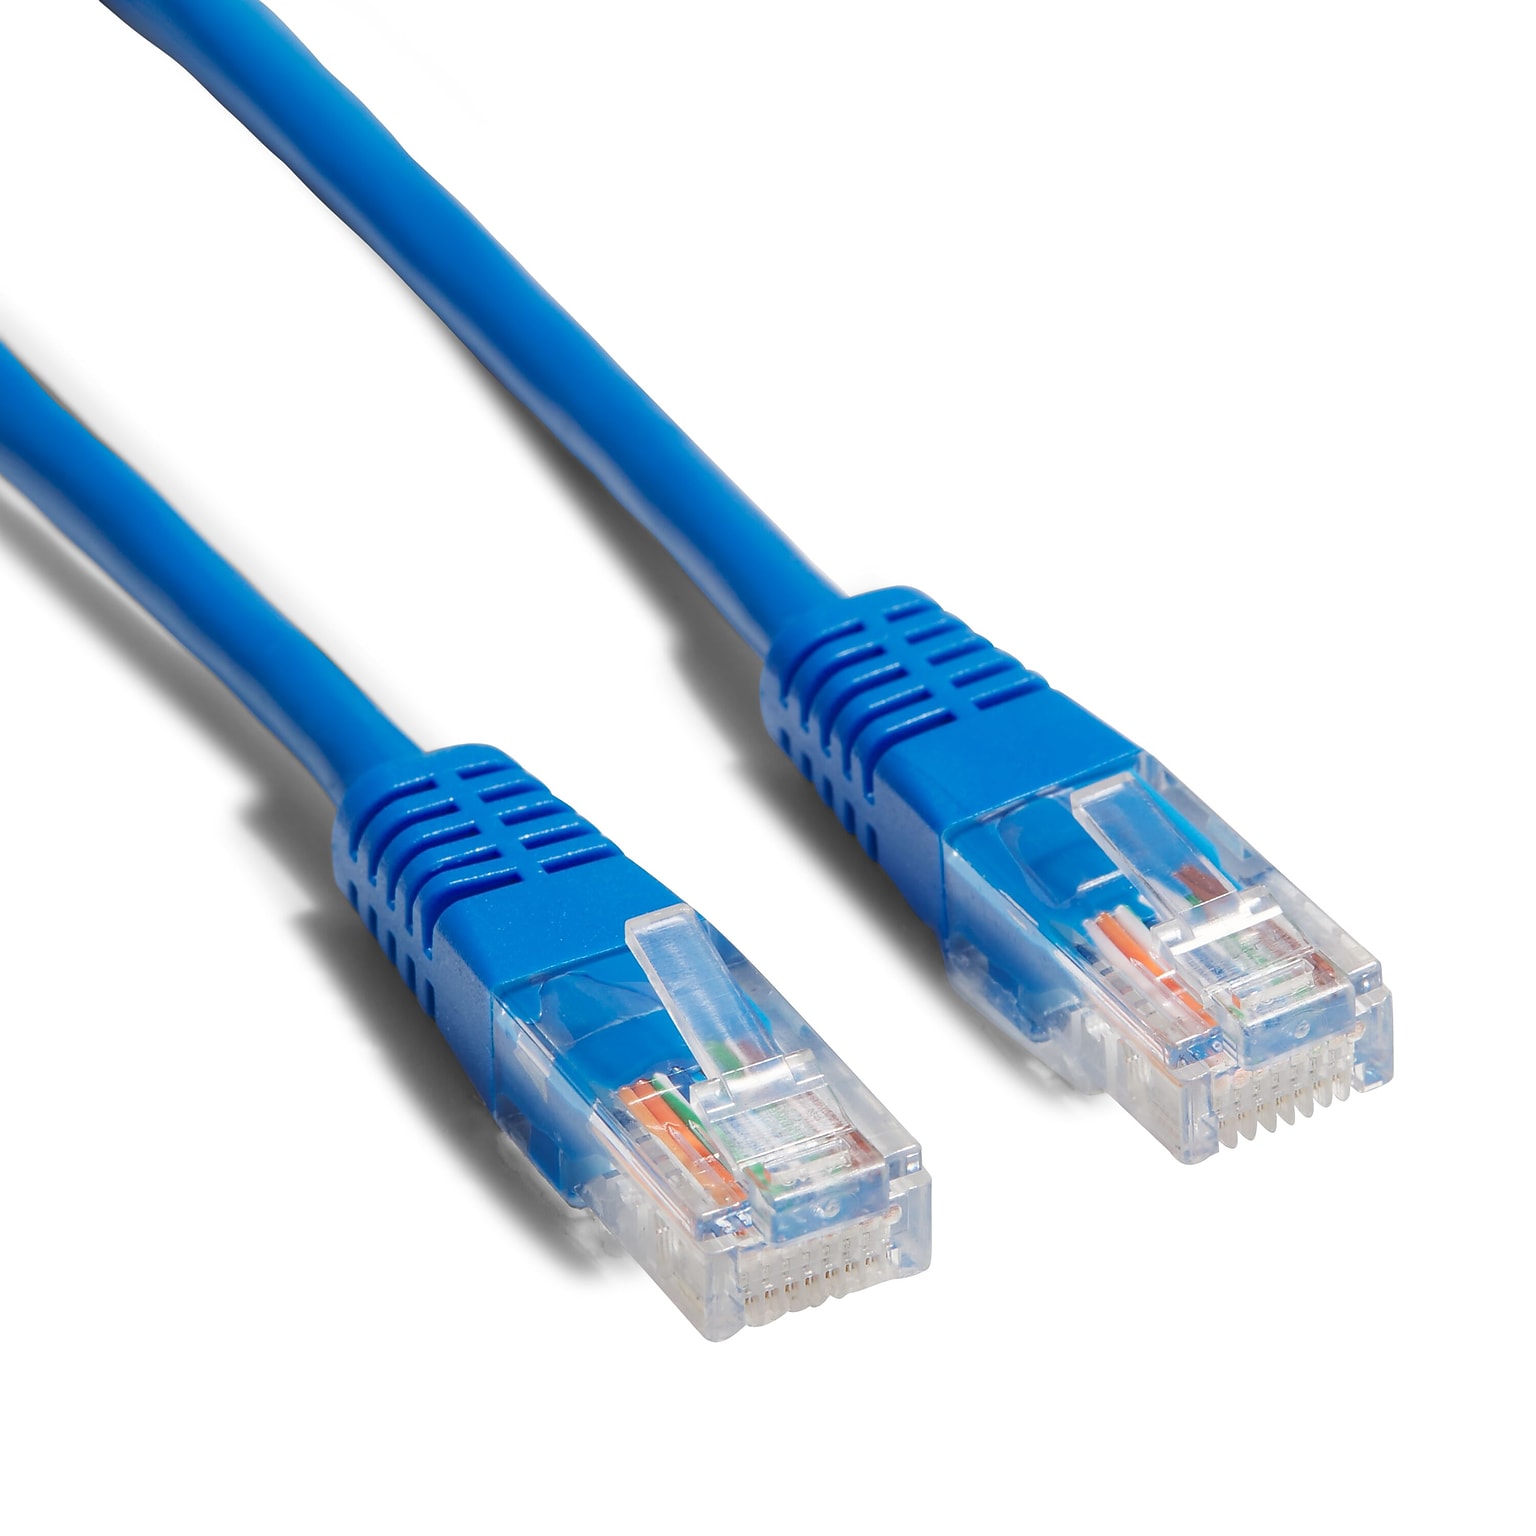 NXT Technologies™ NX29775 50 CAT-5e Cable, Blue